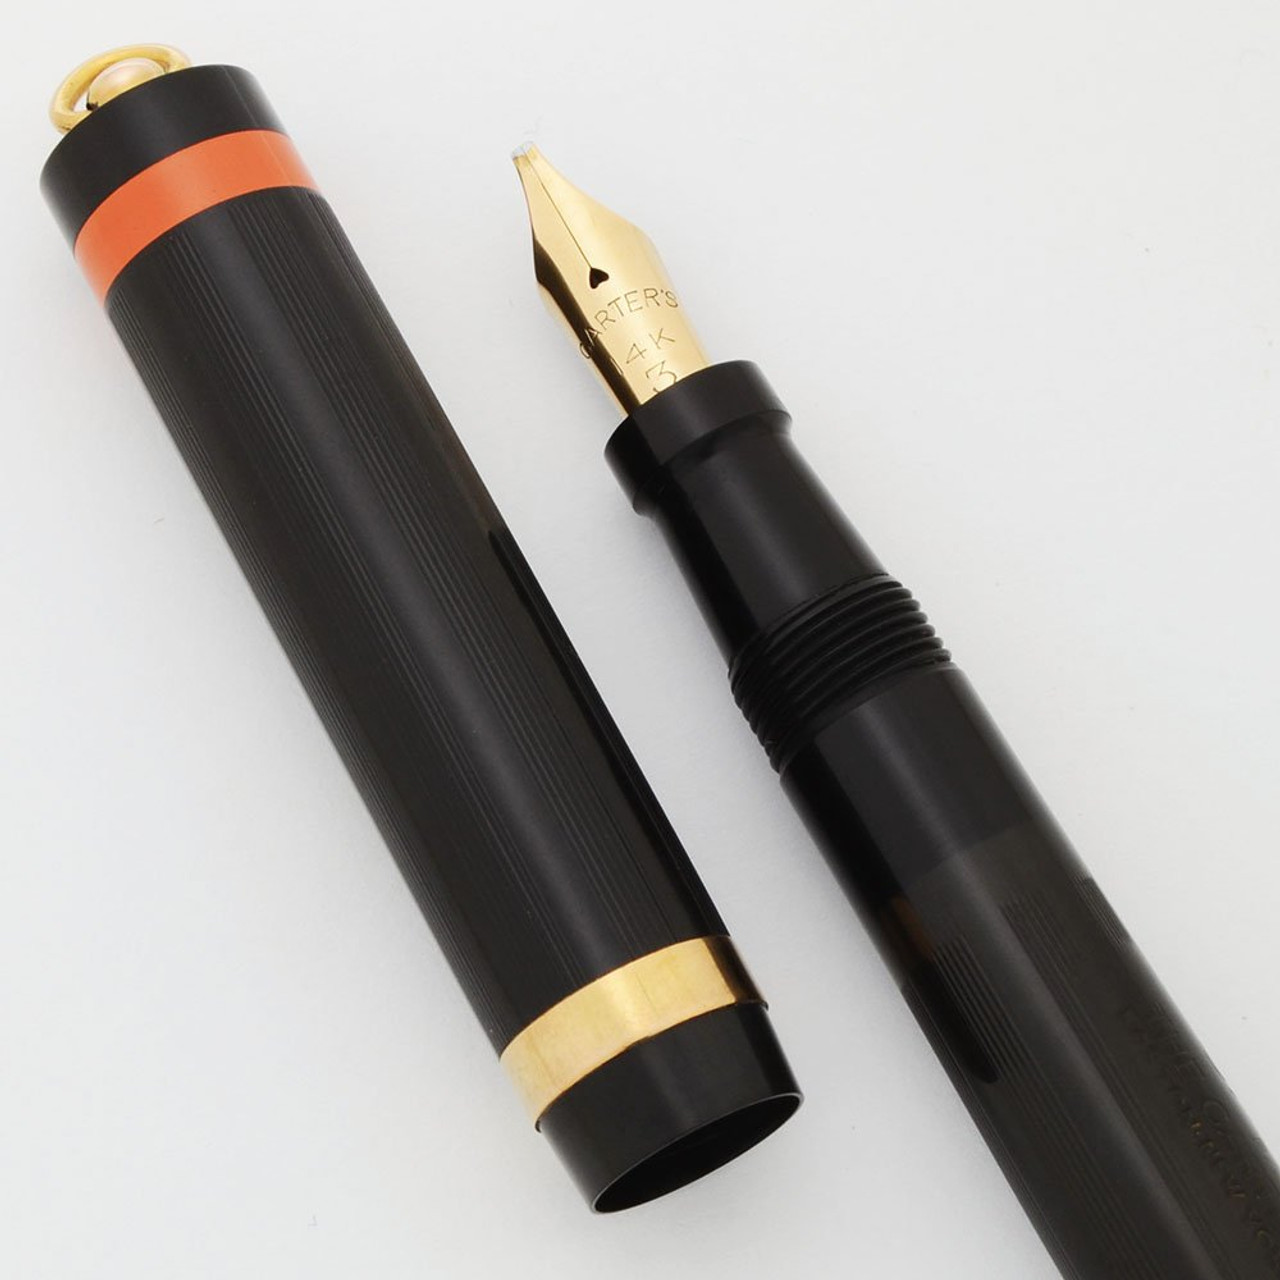 Carters 3233 INX Fountain Pen - Ring Top, Black Hard Rubber w Orange Band, 14k Broad Italic (Excellent, Restored)